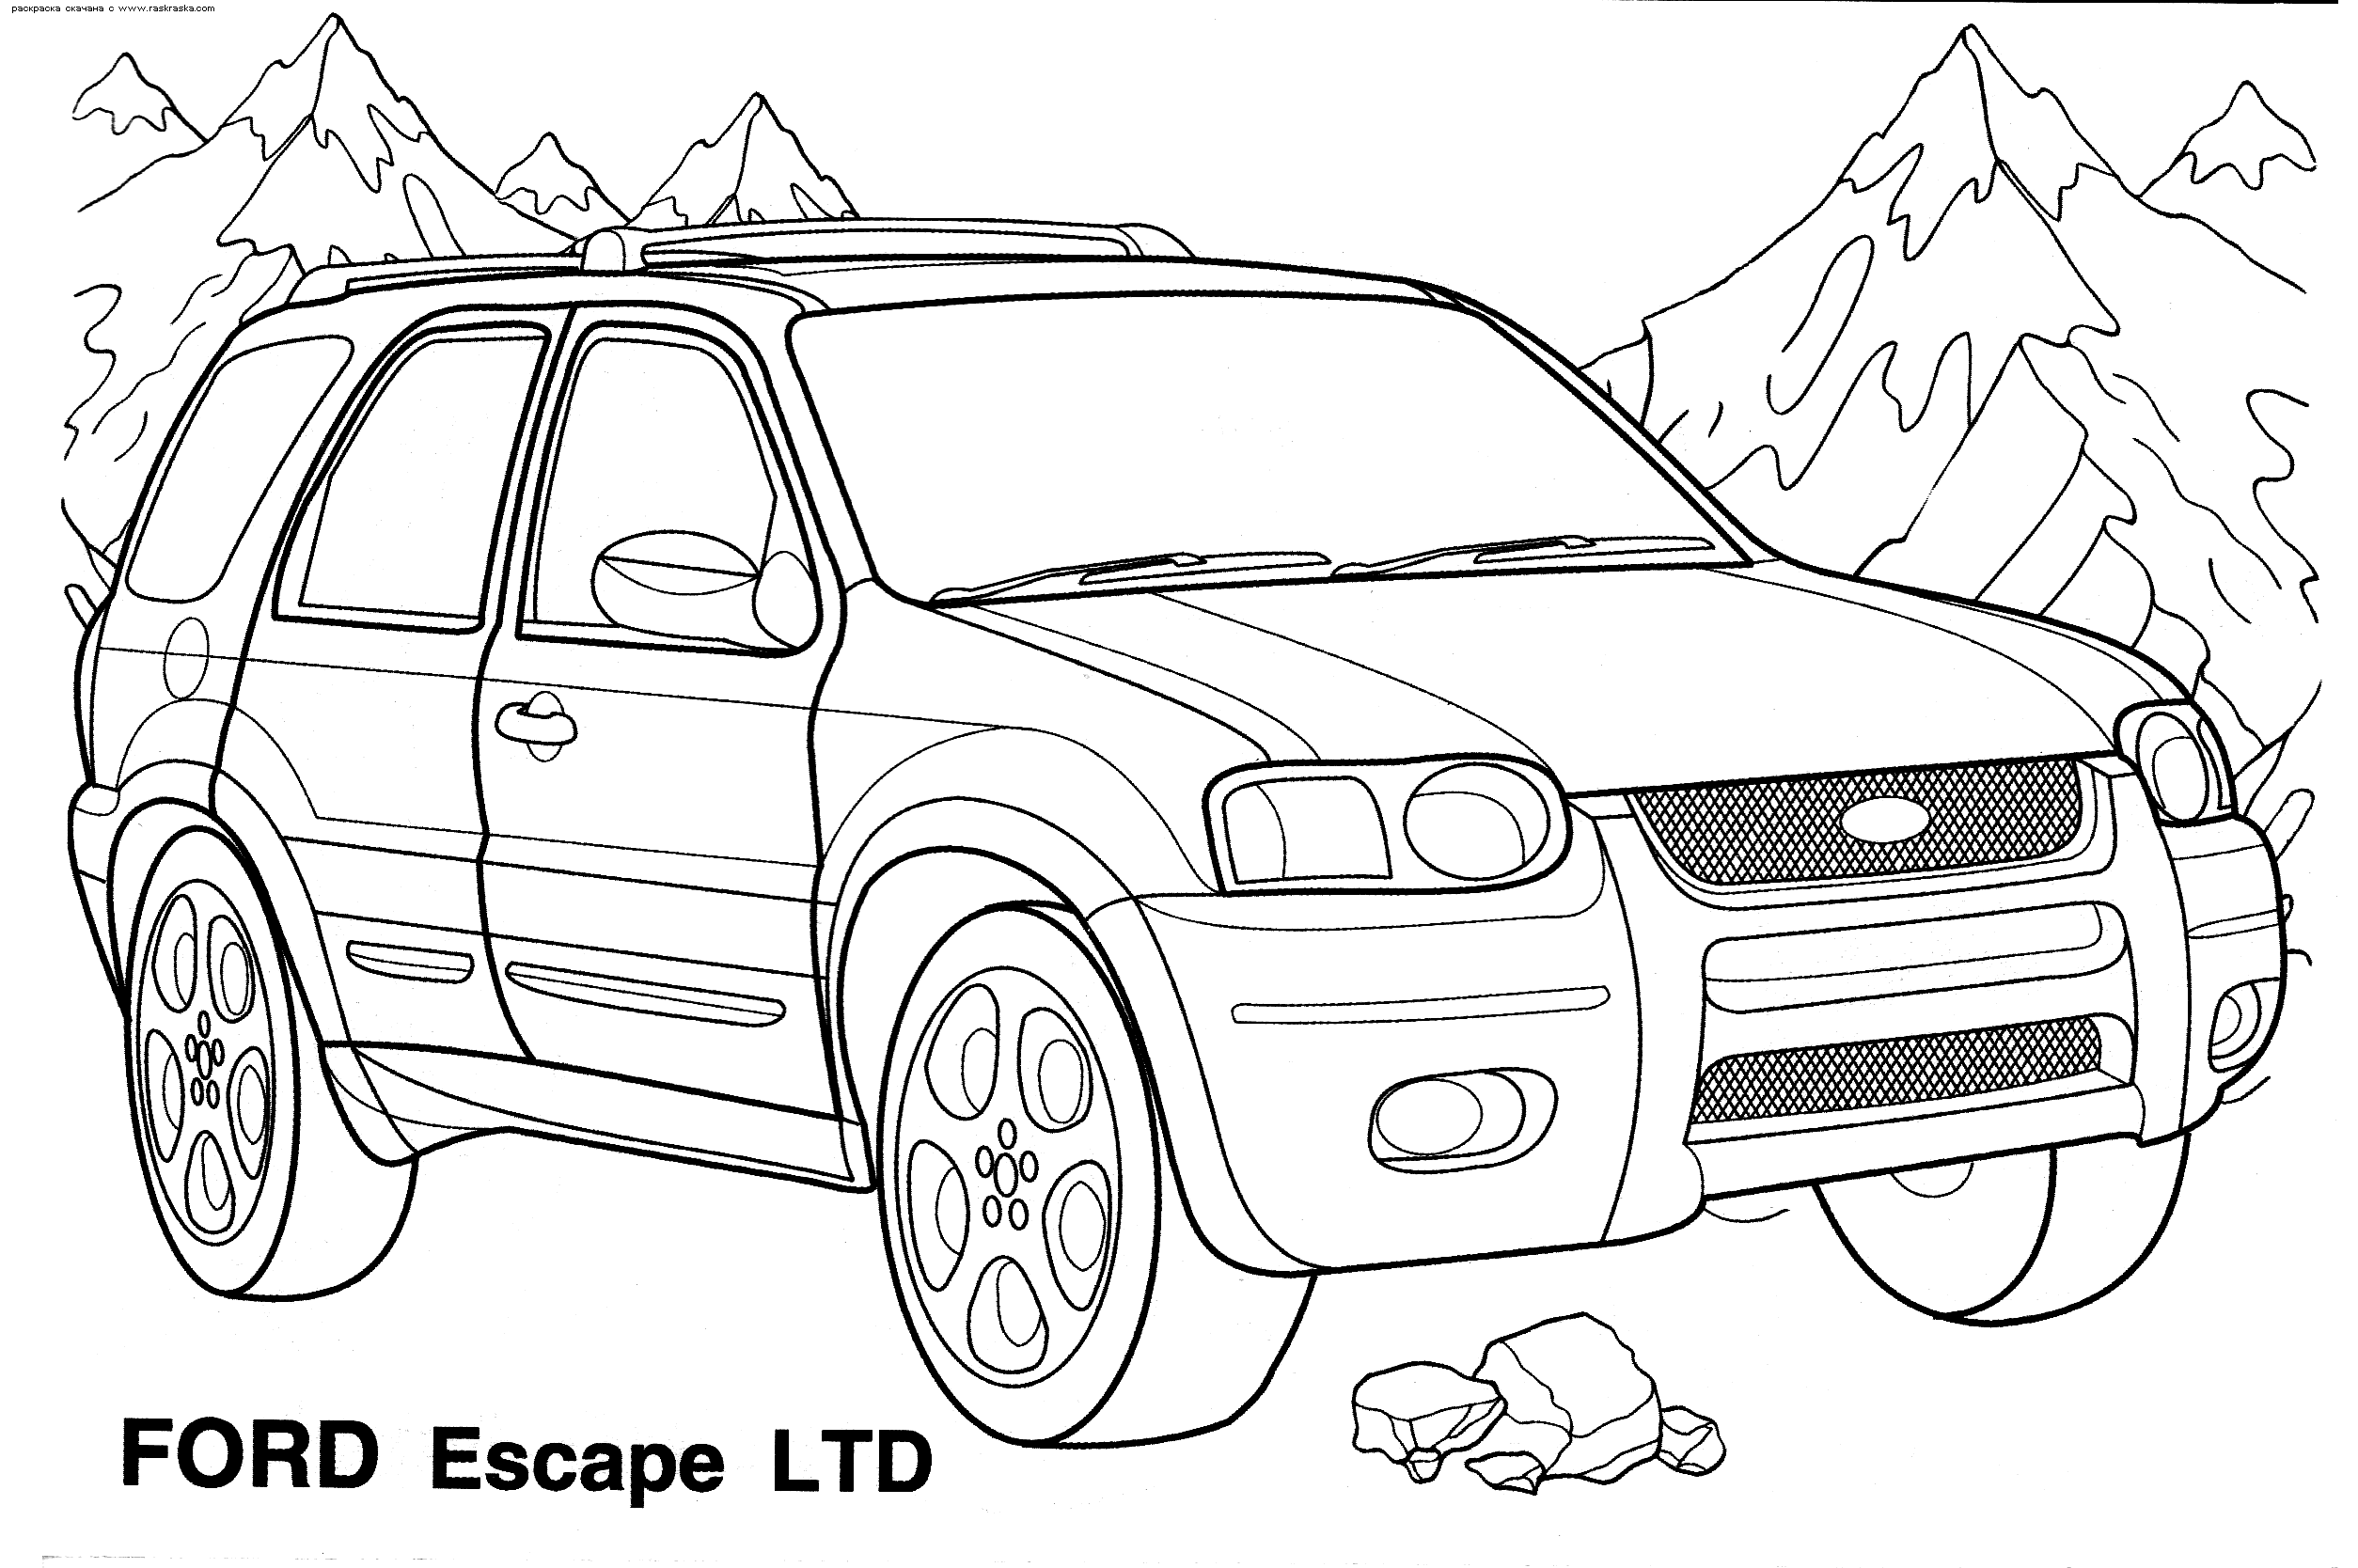 Car Coloring Pages (29) - Coloring Kids